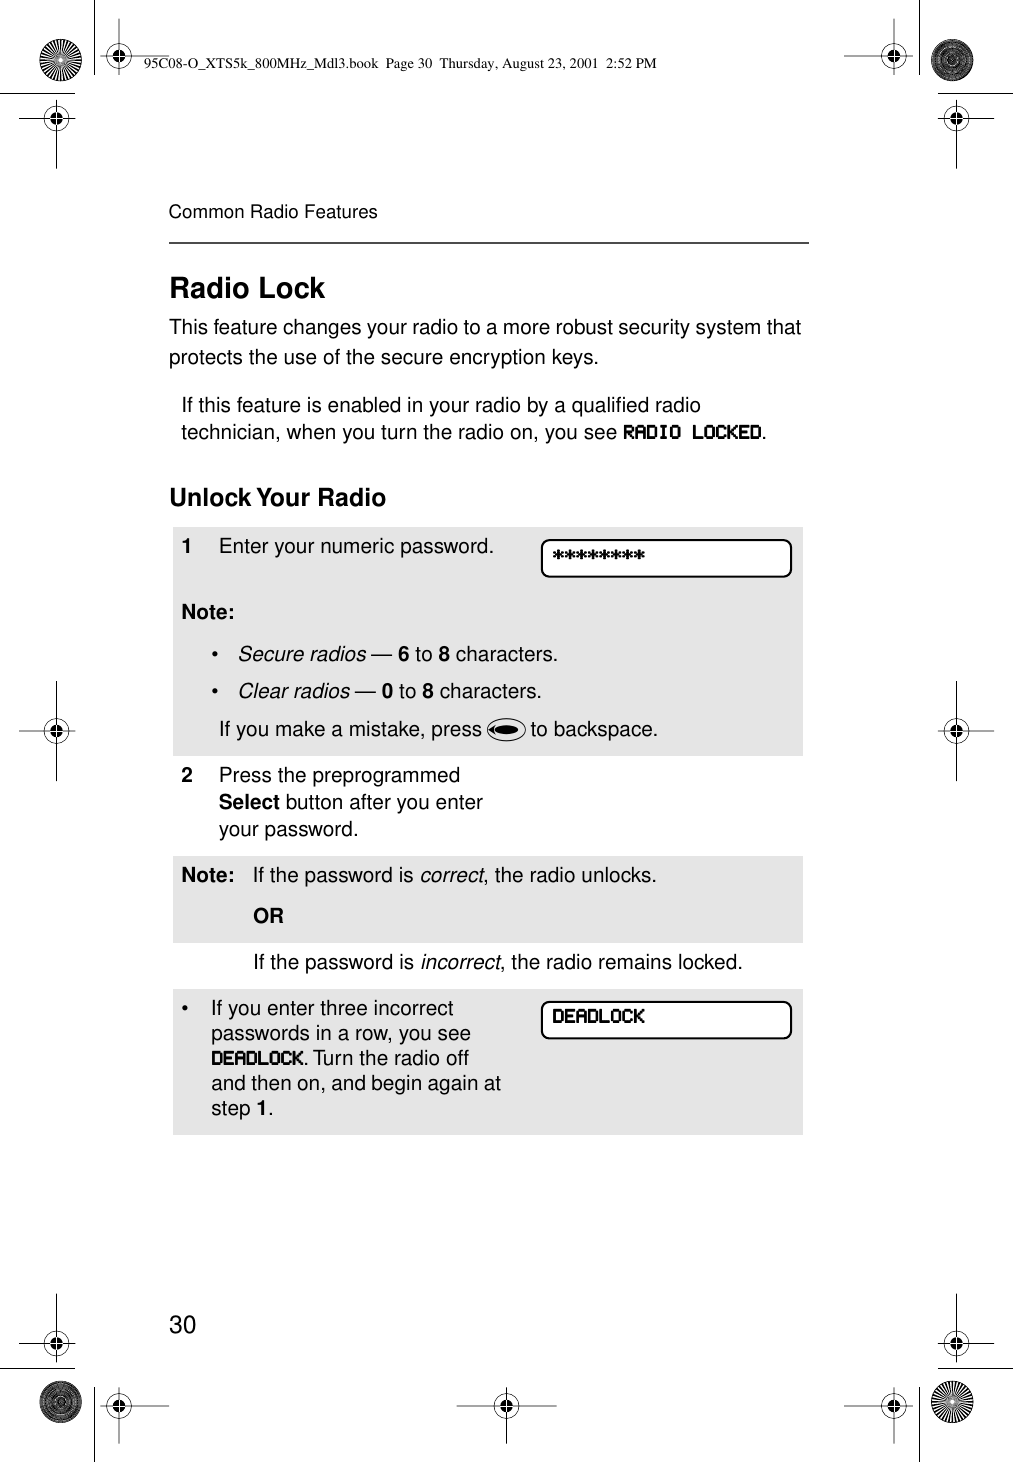 30Common Radio FeaturesRadio LockThis feature changes your radio to a more robust security system that protects the use of the secure encryption keys. Unlock Your  RadioIf this feature is enabled in your radio by a qualiﬁed radio technician, when you turn the radio on, you see RRRRAAAADDDDIIIIOOOO    LLLLOOOOCCCCKKKKEEEEDDDD.1Enter your numeric password.Note:•Secure radios — 6 to 8 characters.•Clear radios — 0 to 8 characters.If you make a mistake, press V to backspace.2Press the preprogrammed Select button after you enter your password.Note: If the password is correct, the radio unlocks.ORIf the password is incorrect, the radio remains locked. • If you enter three incorrect passwords in a row, you see DDDDEEEEAAAADDDDLLLLOOOOCCCCKKKK. Turn the radio off and then on, and begin again at step 1.********************************DDDDEEEEAAAADDDDLLLLOOOOCCCCKKKK95C08-O_XTS5k_800MHz_Mdl3.book  Page 30  Thursday, August 23, 2001  2:52 PM